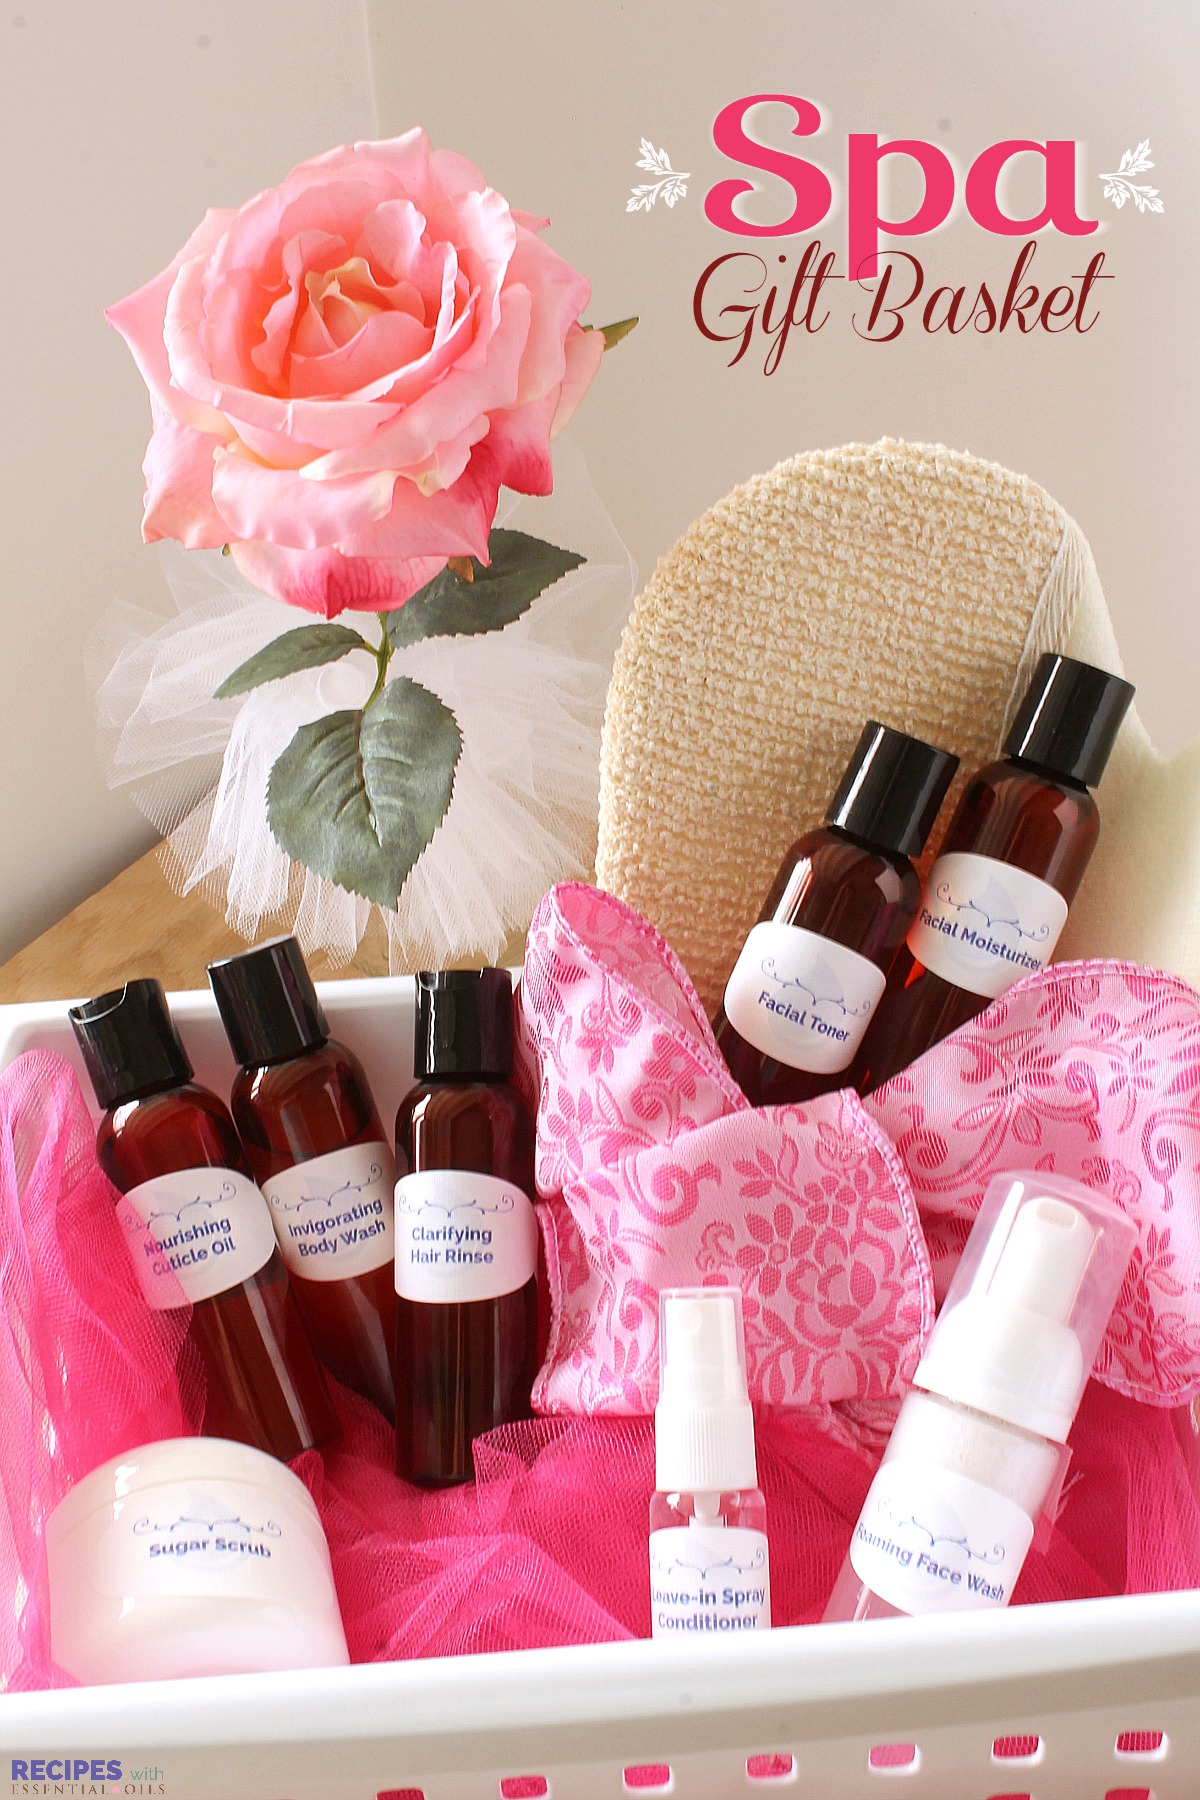 Gift Idea: Spa Gift Basket filled with luxurious beauty products made from essential oils from RecipeswithEssentialOils.com